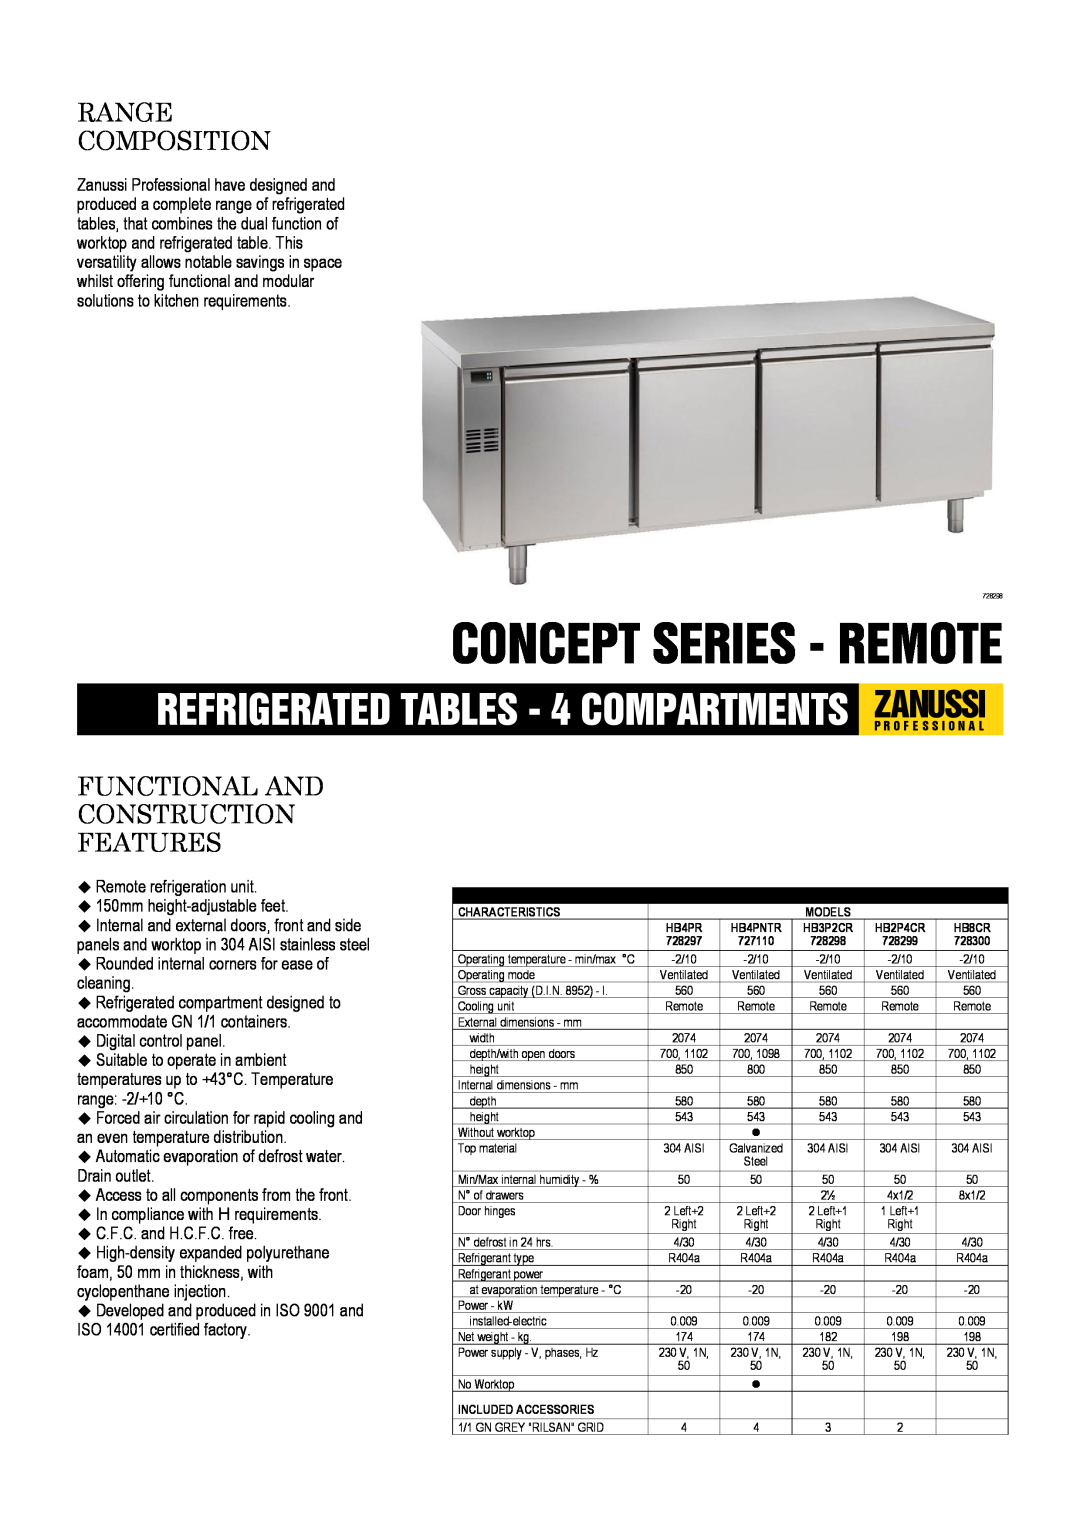 Zanussi 728299, 728300, 728298 dimensions Concept Series - Remote, Range Composition, Functional And Construction Features 